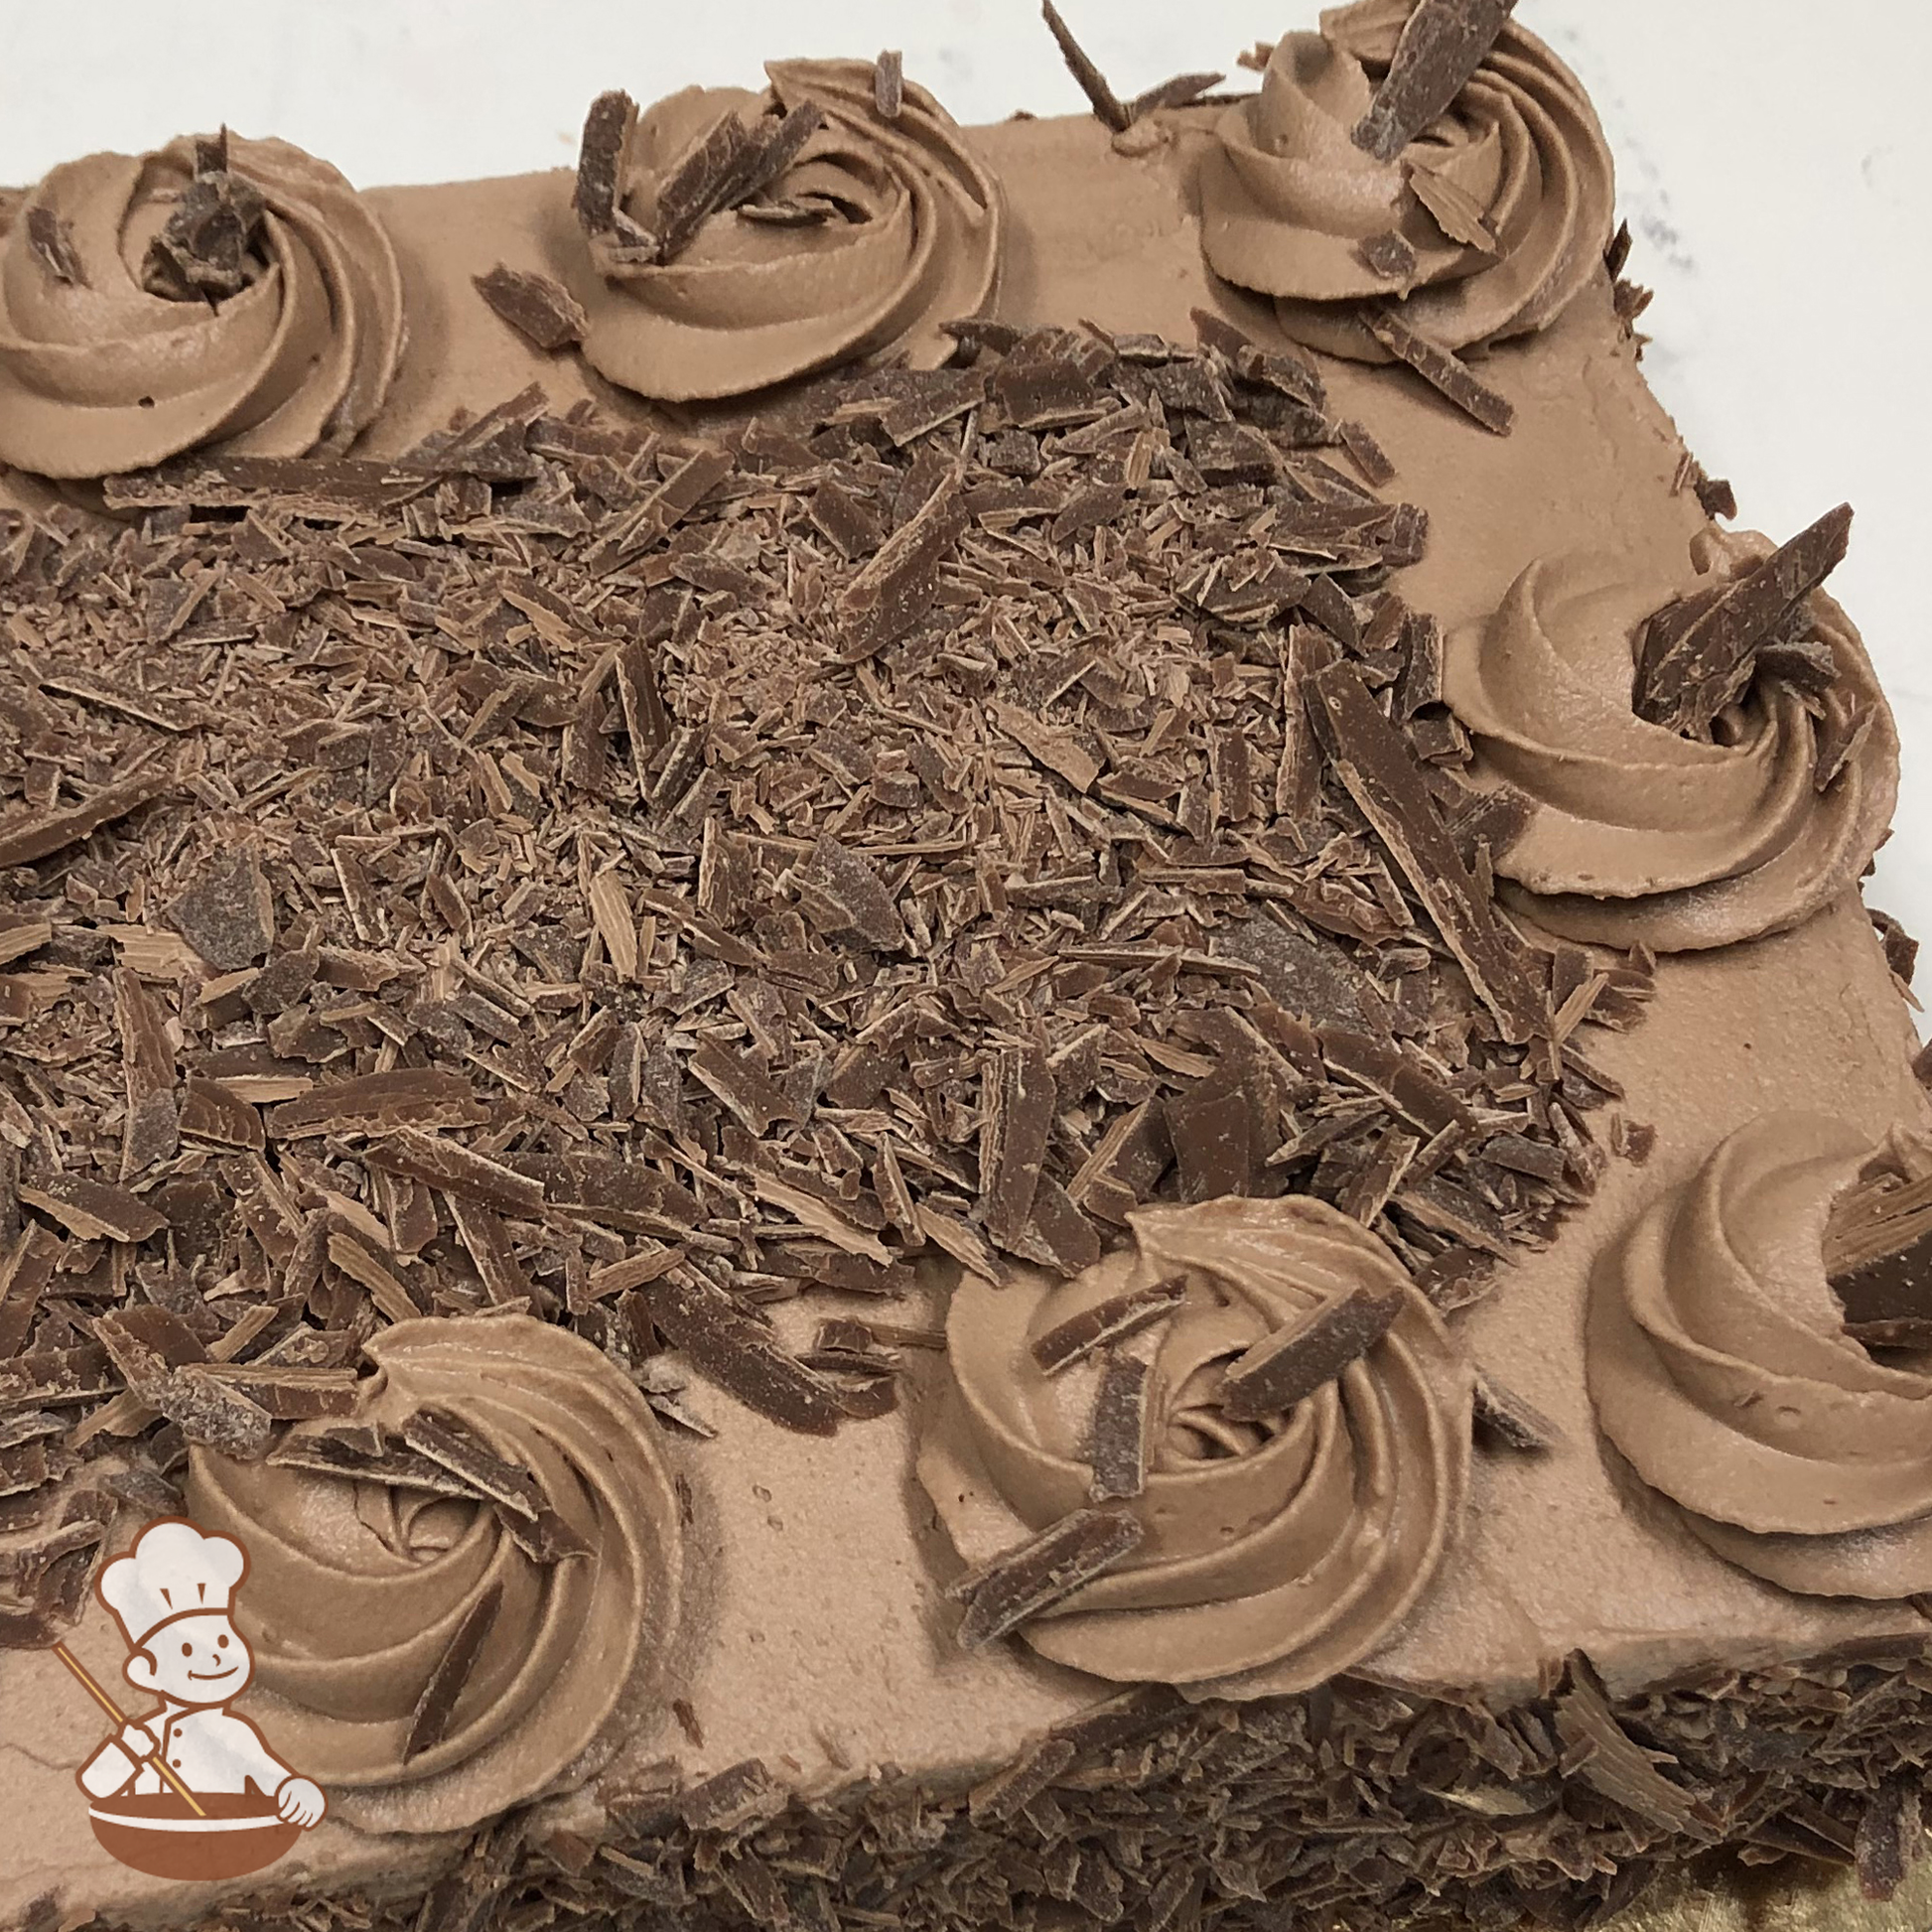 Celebration sheet cake with chocolate icing and chocolate shavings.